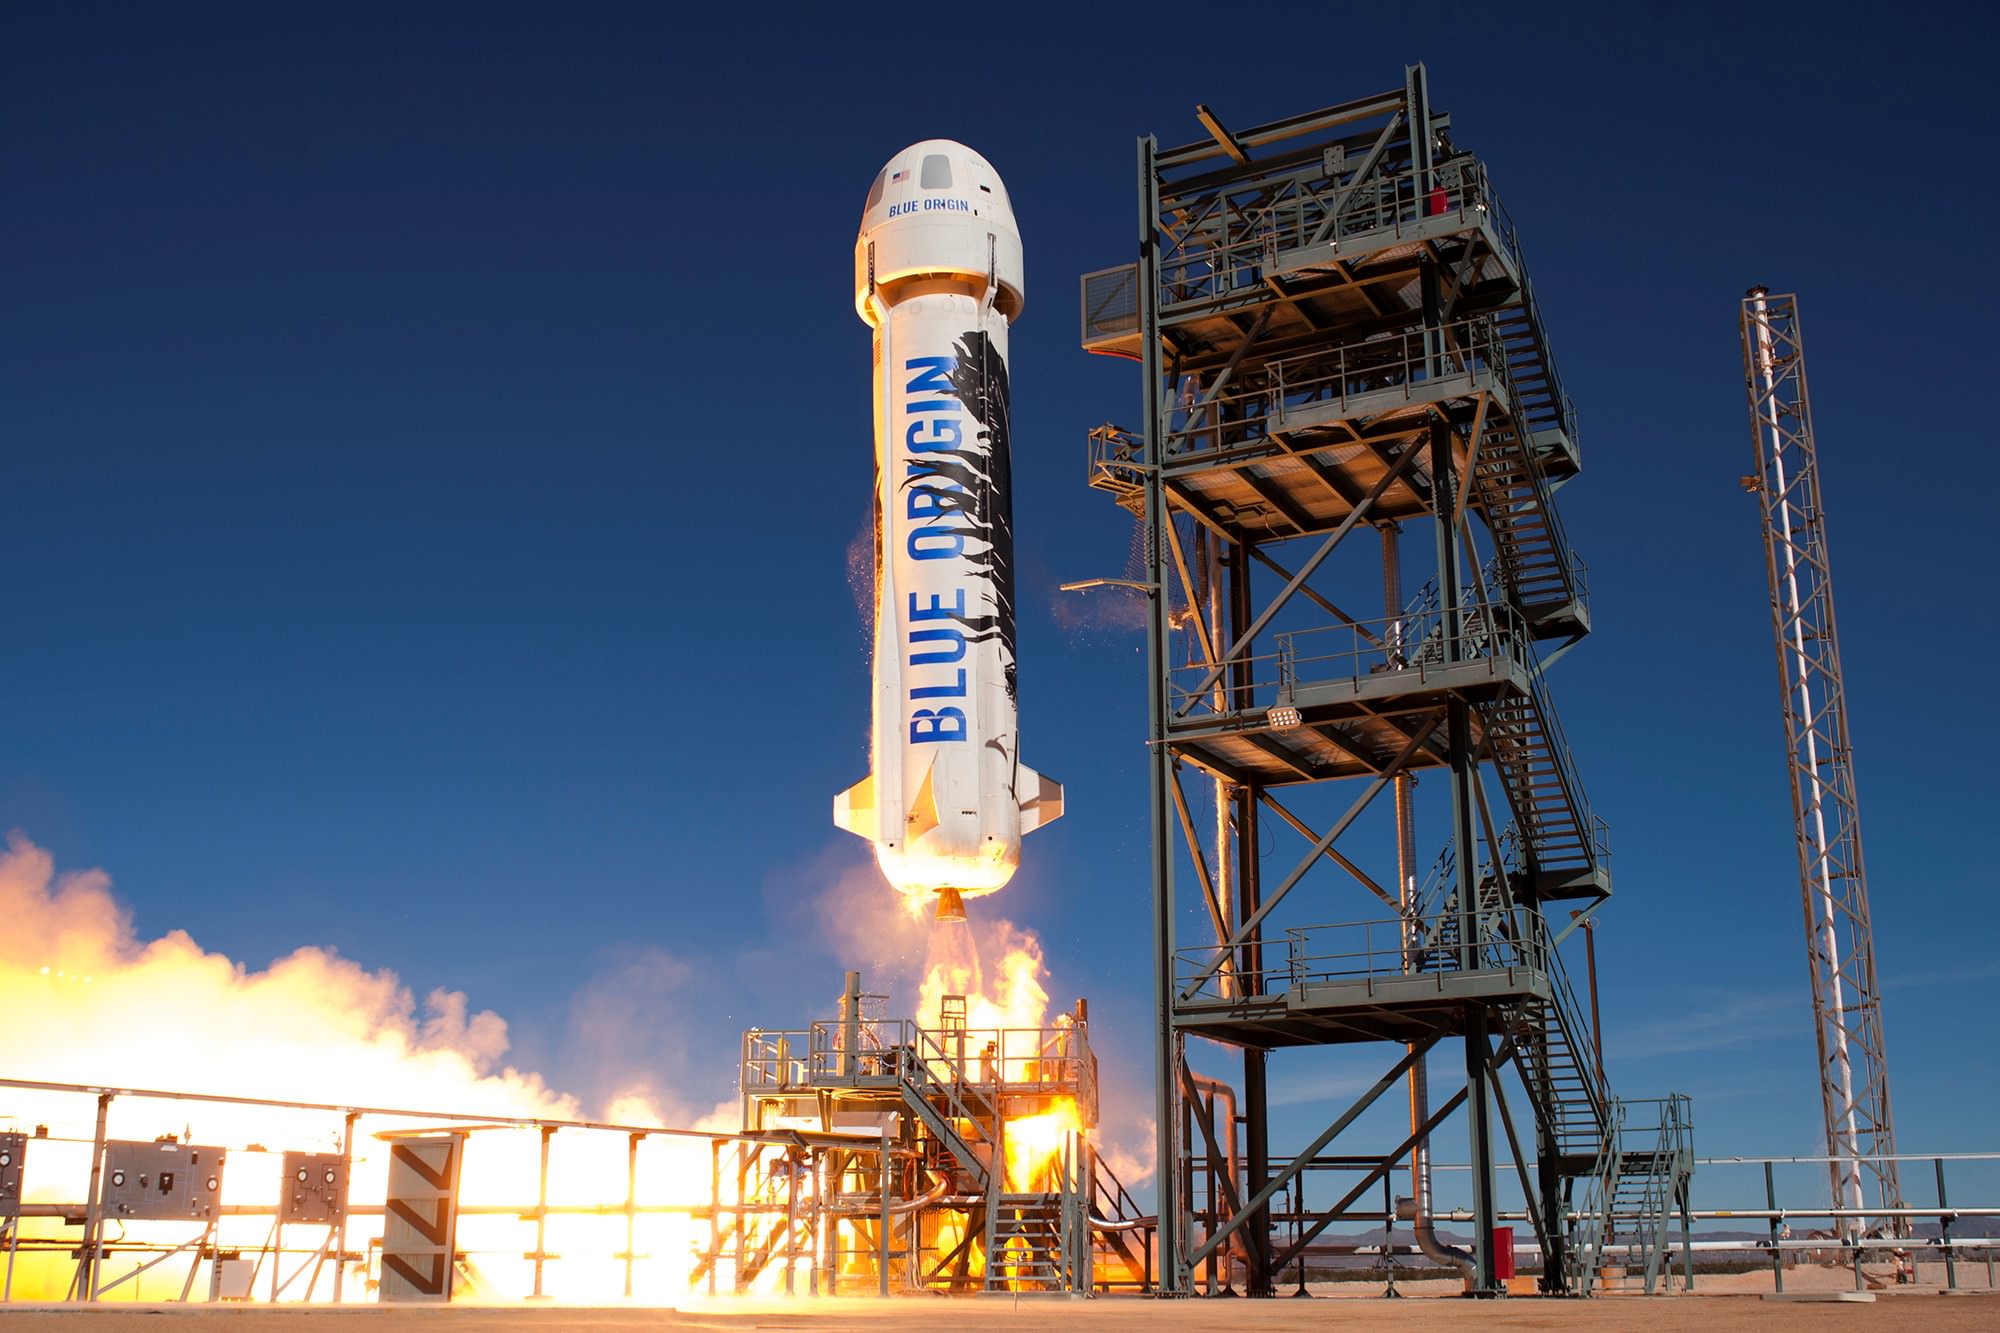 Blue Origin Reaches Another Milestone Reusable Rocket Launches and